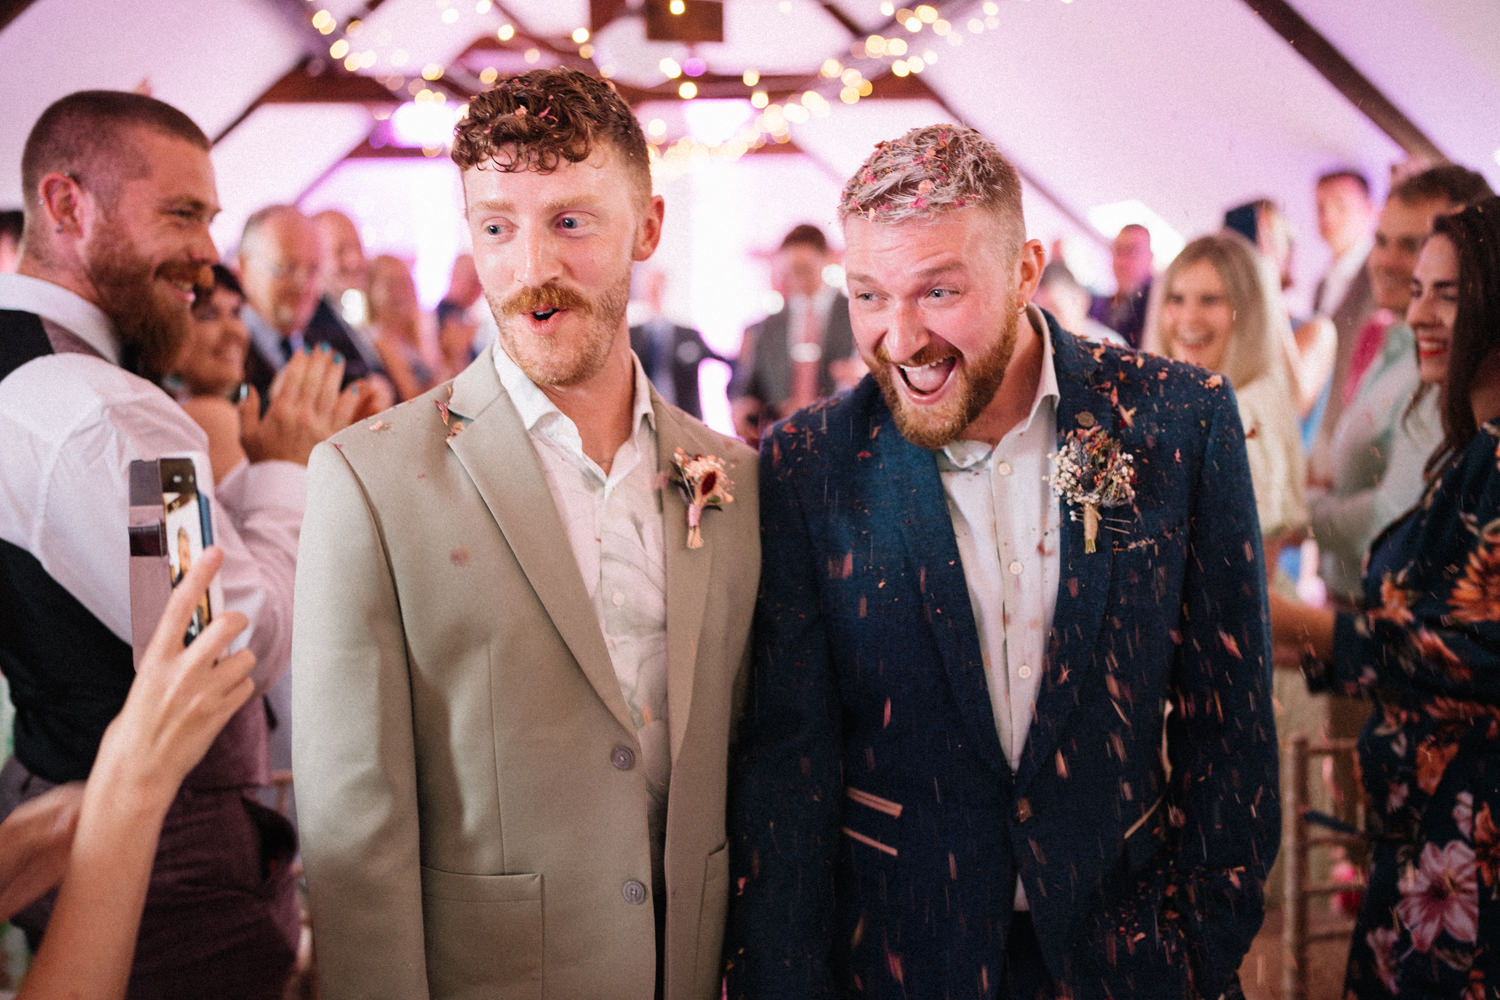 grooms walking down the aisle with confetti  LGBTQ Wedding Photographer Ireland